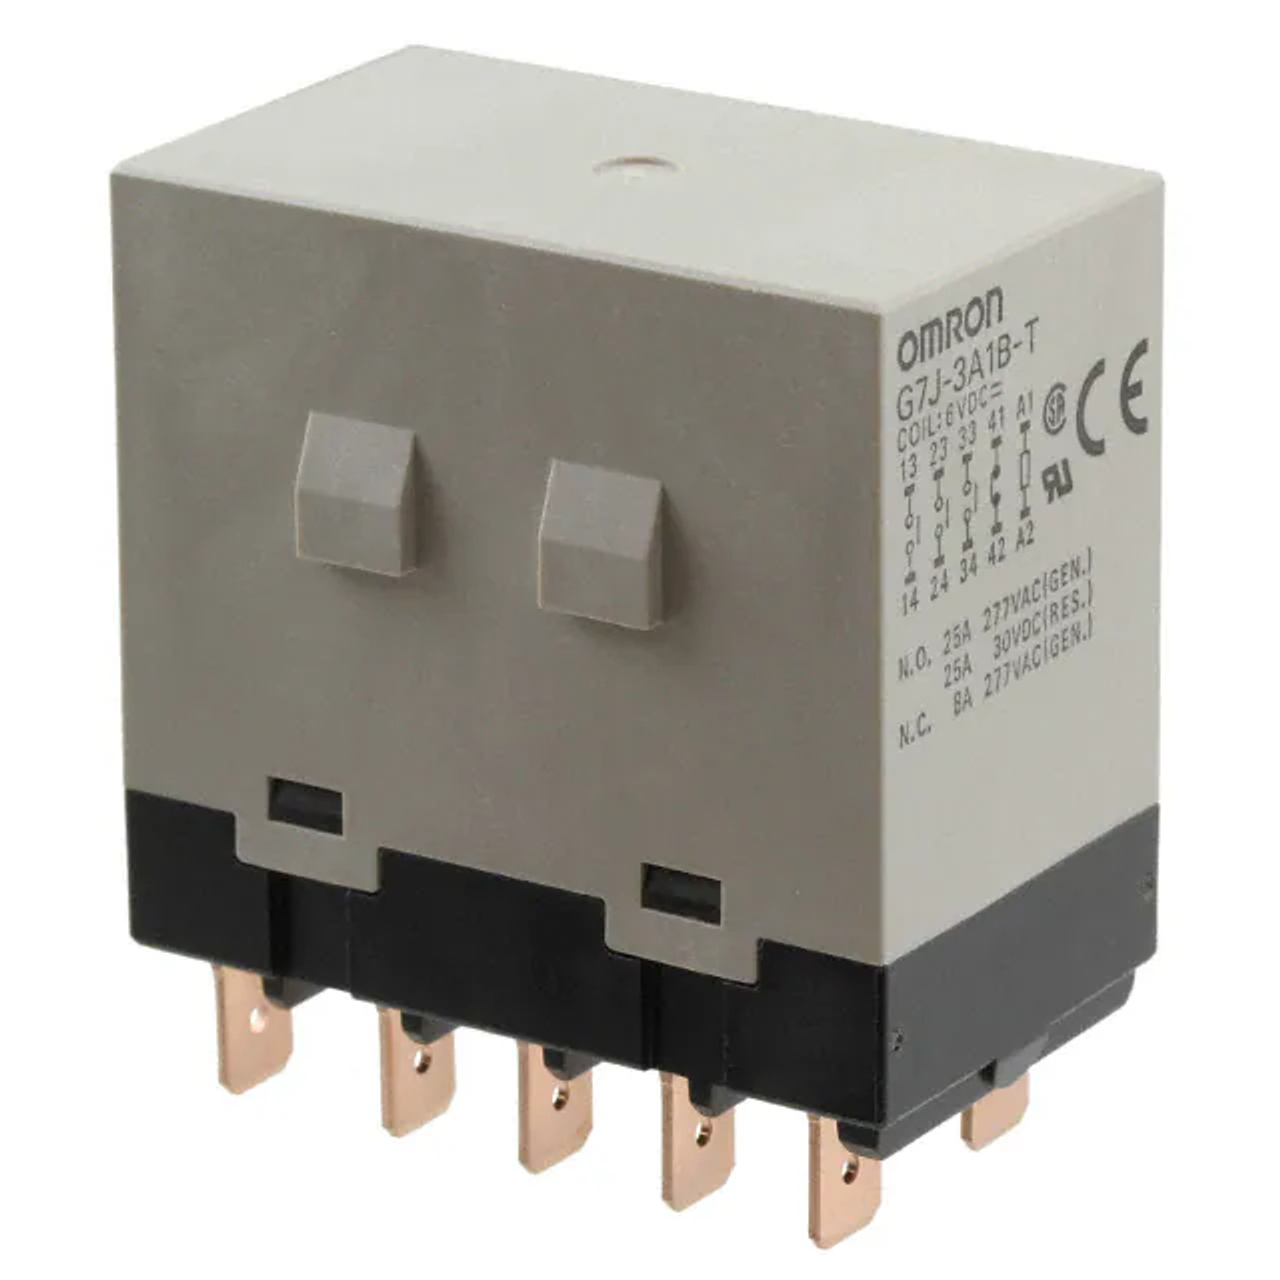 Omron G7J-3A1B-T DC6 Power Relays